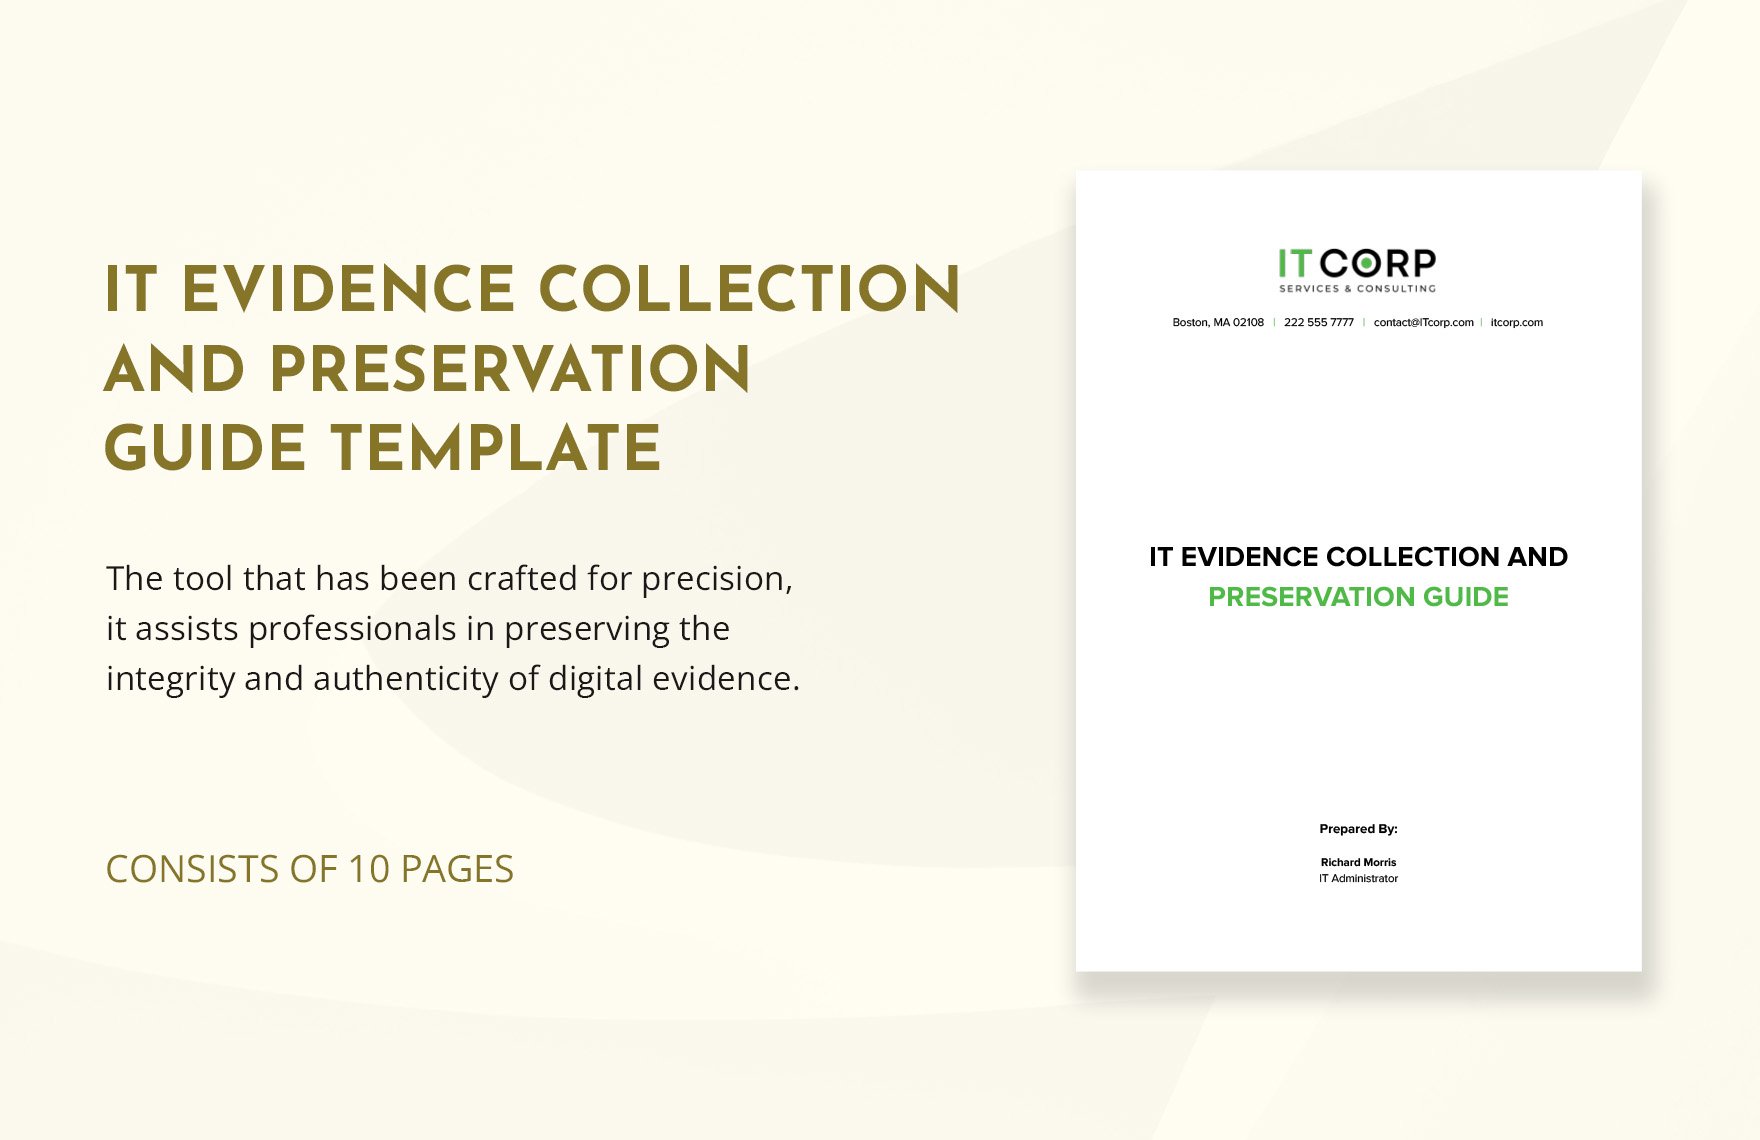 IT Evidence Collection and Preservation Guide Template